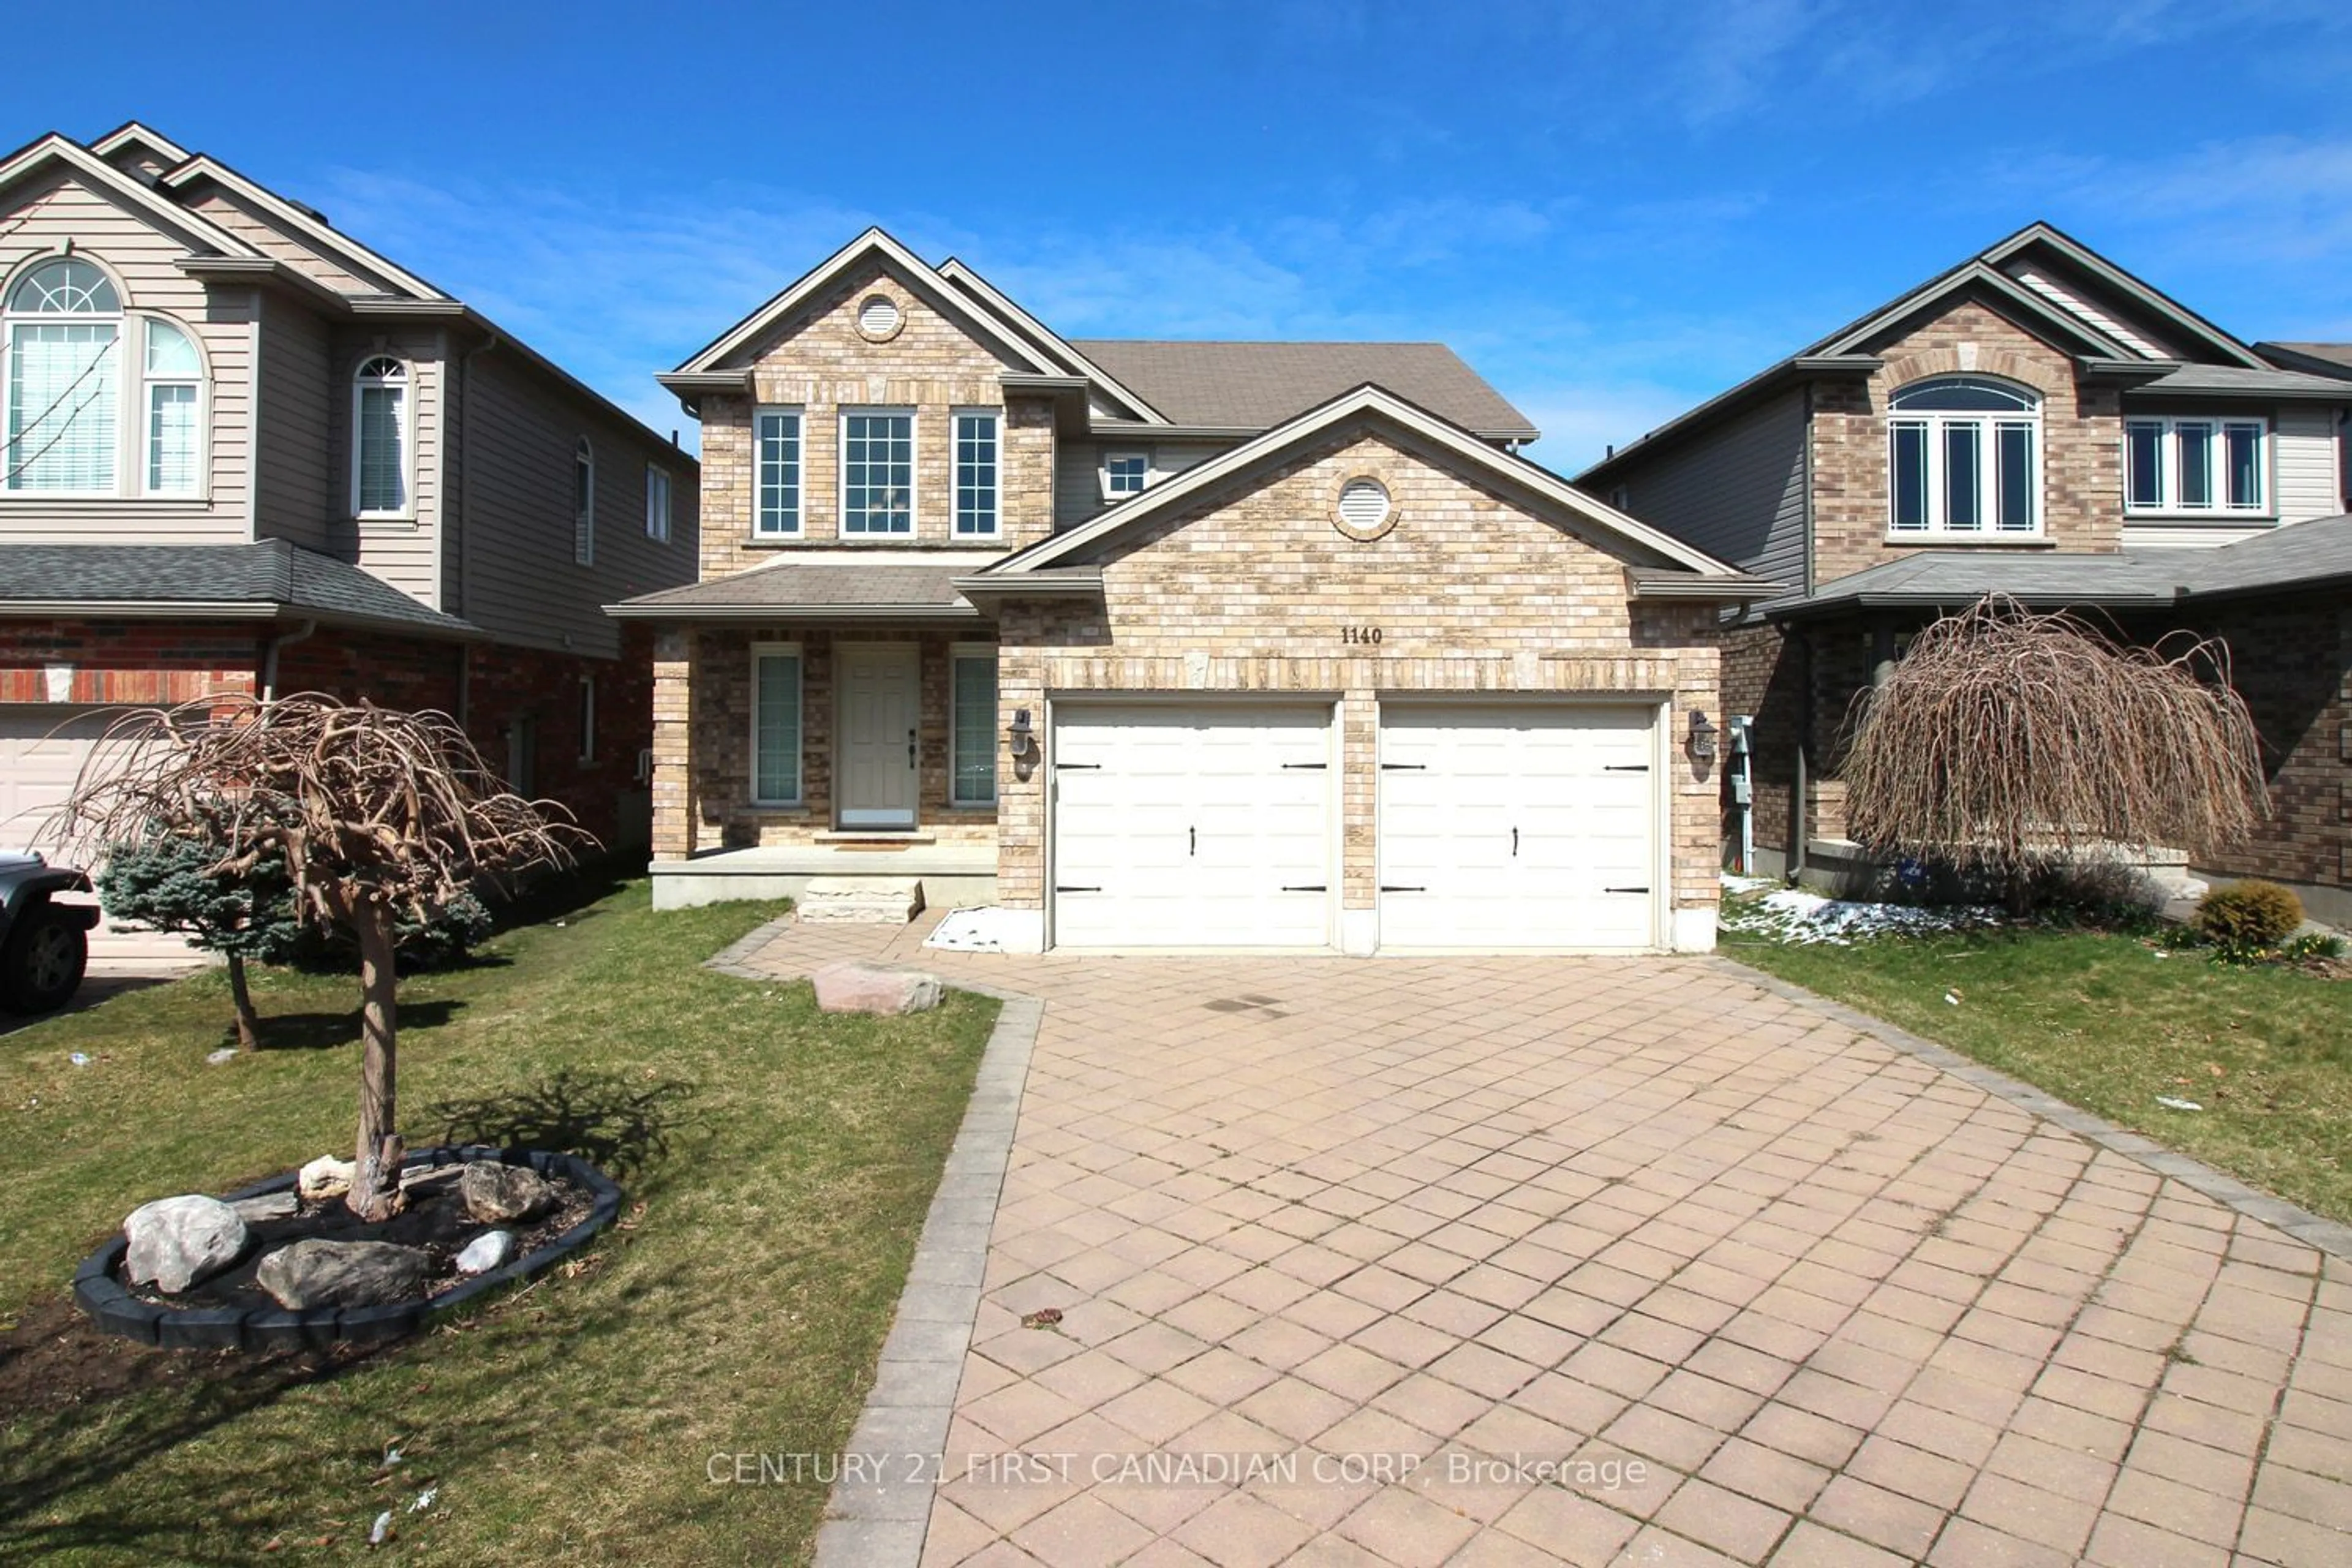 Home with brick exterior material for 1140 Silverfox Dr, London Ontario N6G 0C8